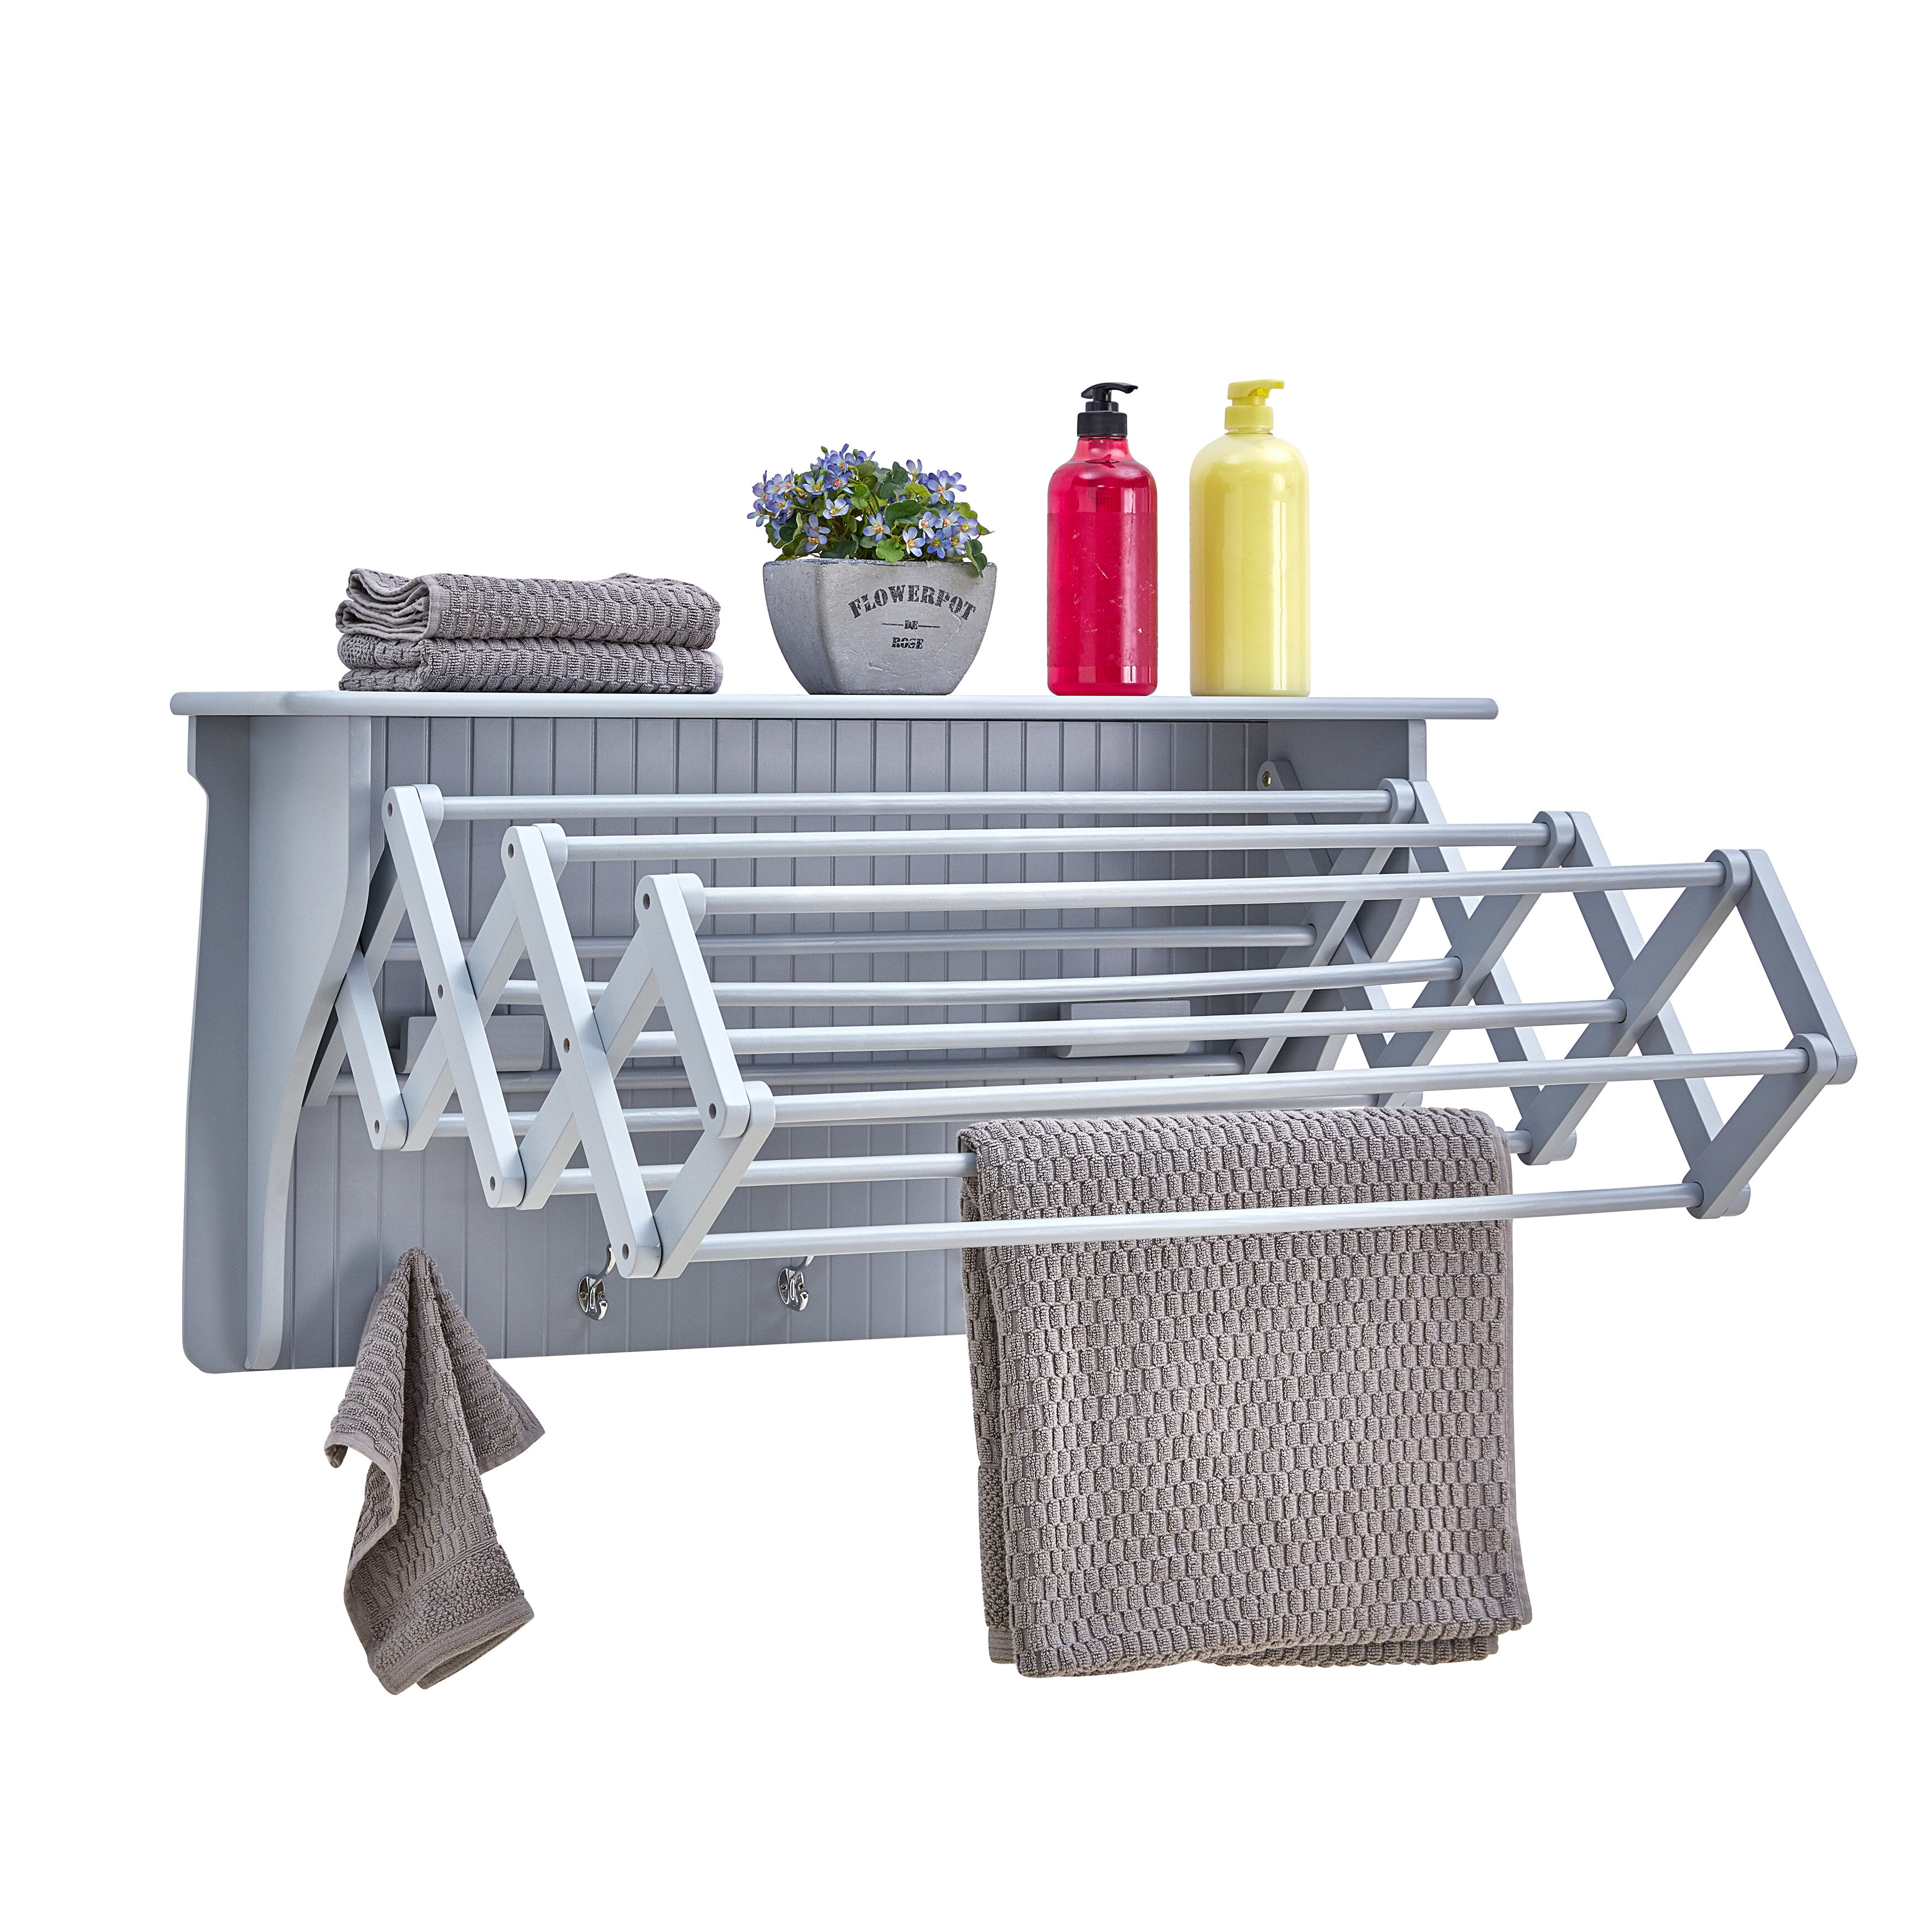 Honey-Can-Do 3-Tier Folding Accordion Steel Clothes Drying Rack with Mesh  Top, Silver/Blue